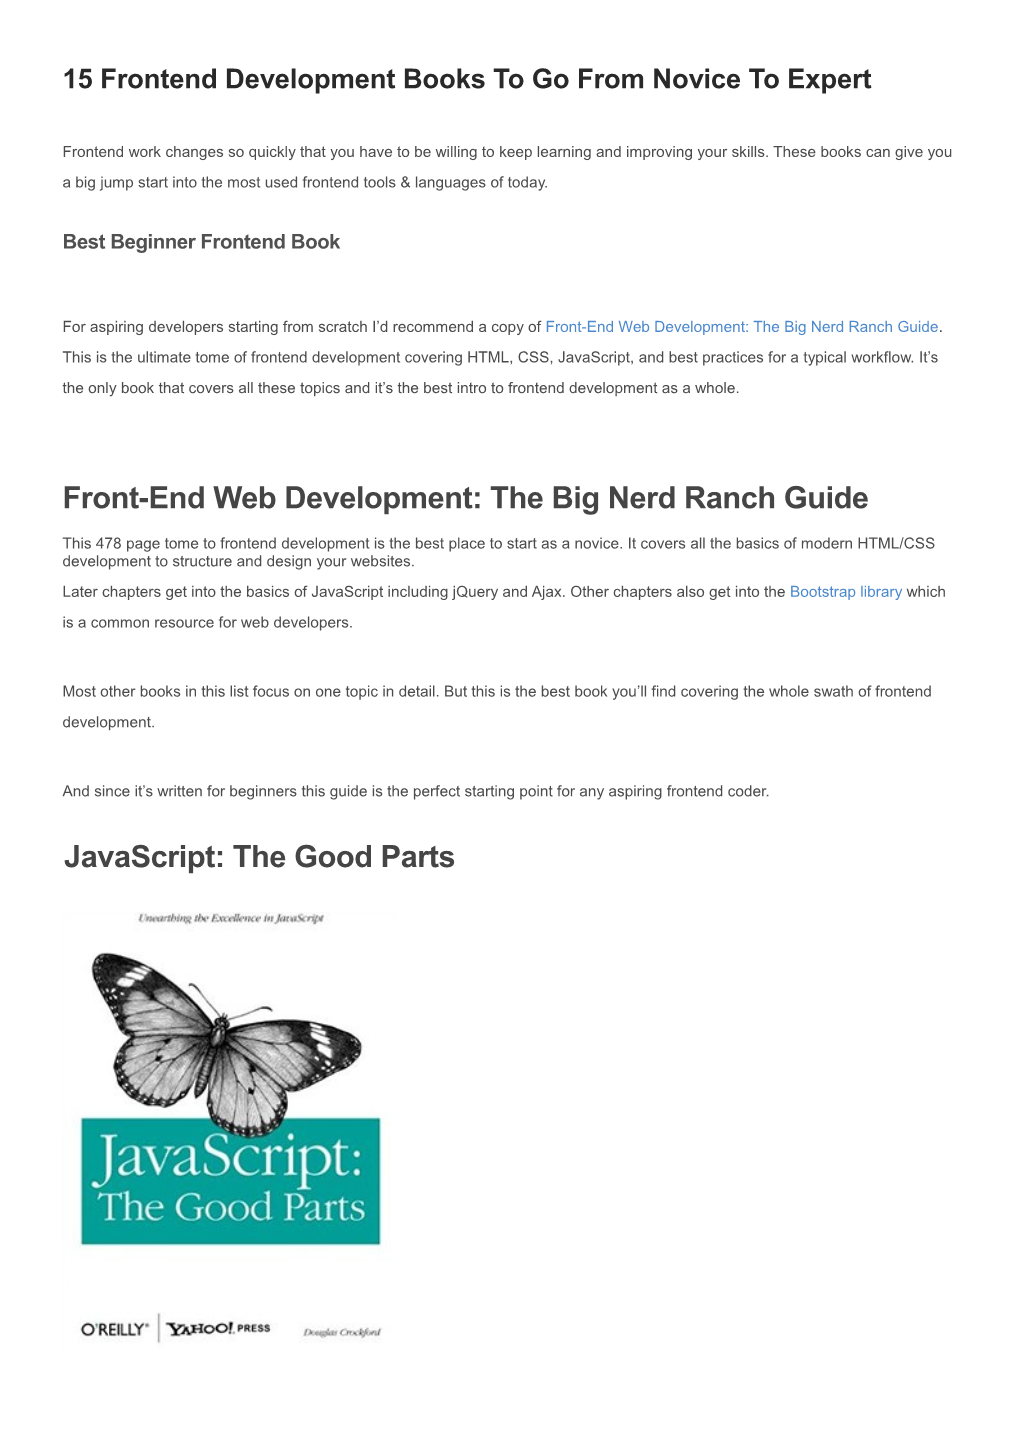 15 Frontend Development Books to Go from Novice to Expert